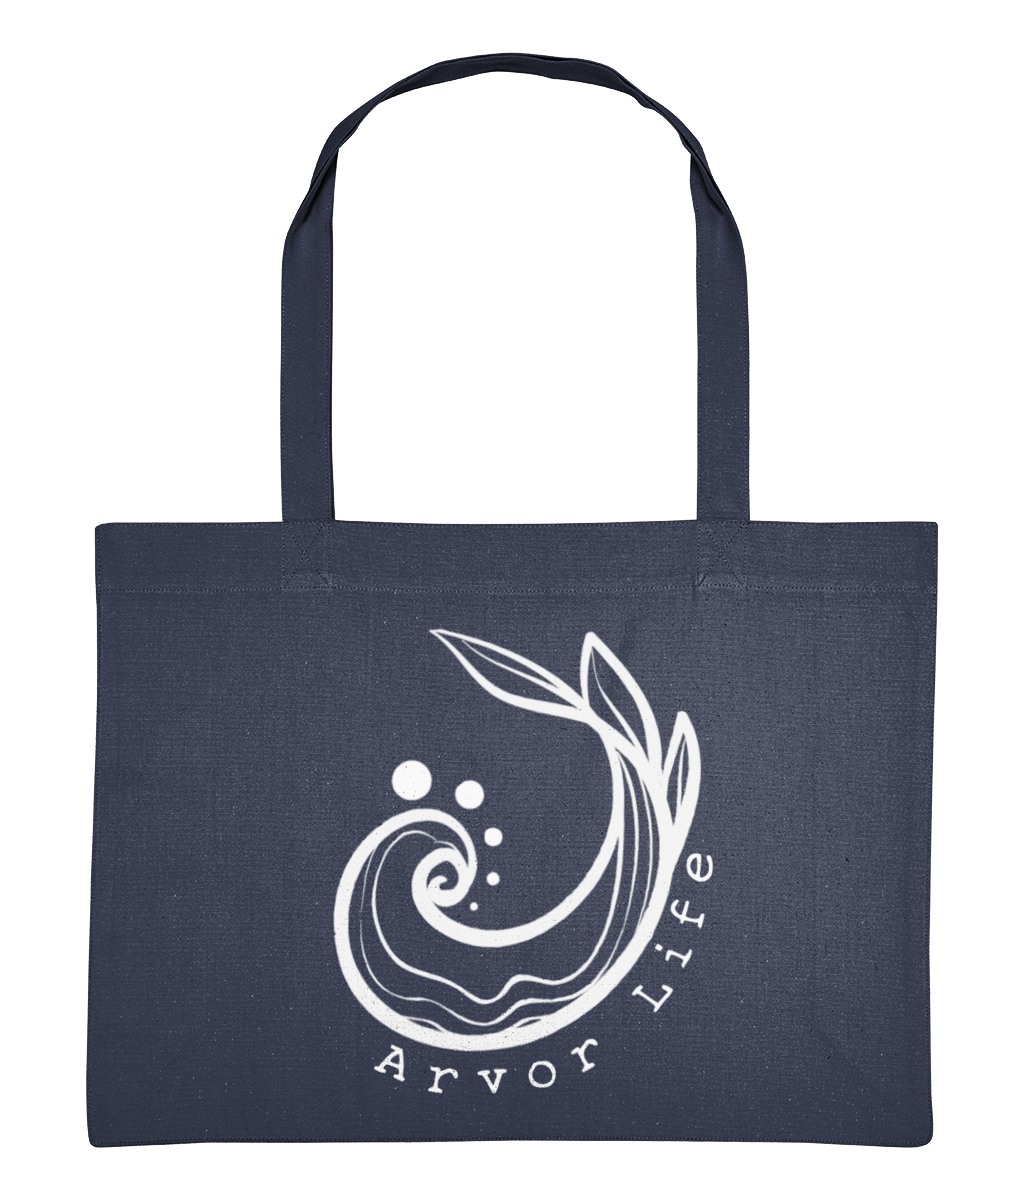 Arvor Life Recycled Cotton Shopping Bag